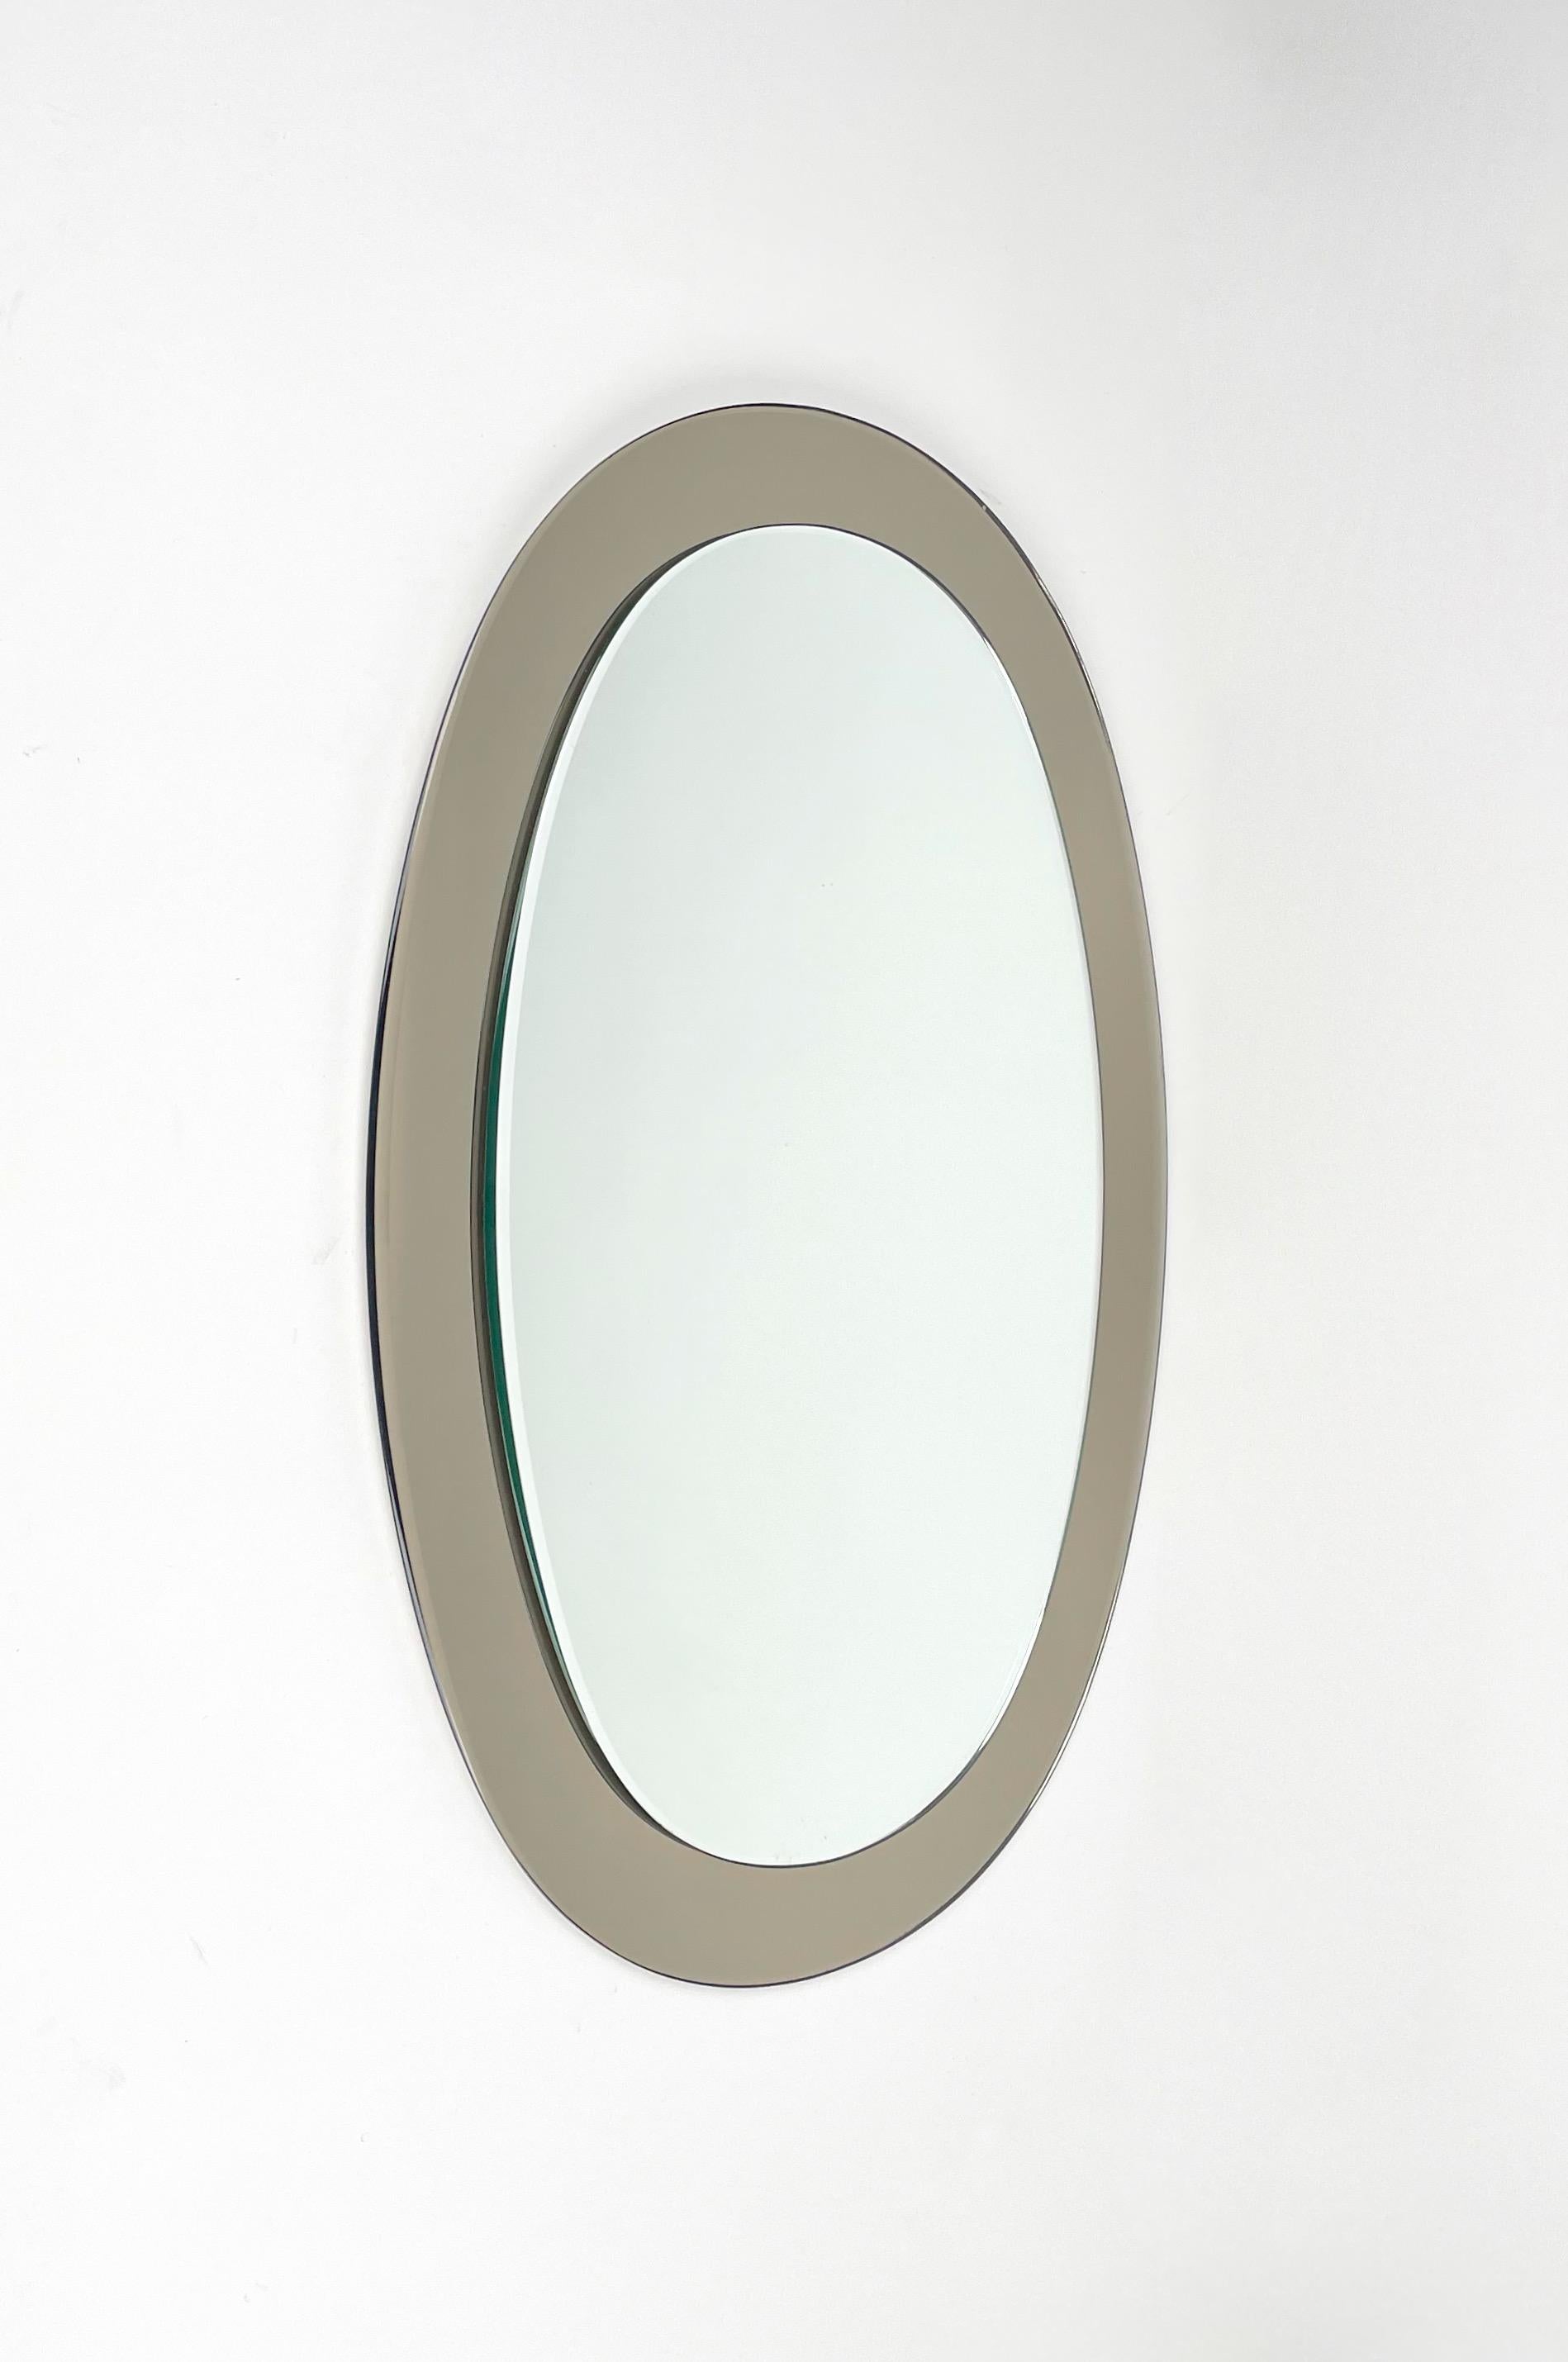 Oval wall mirror with grey frame by Sena Cristal. Made in Italy in the 1970s. 

The original label is still attached on the back of the mirror, as shown in photos.